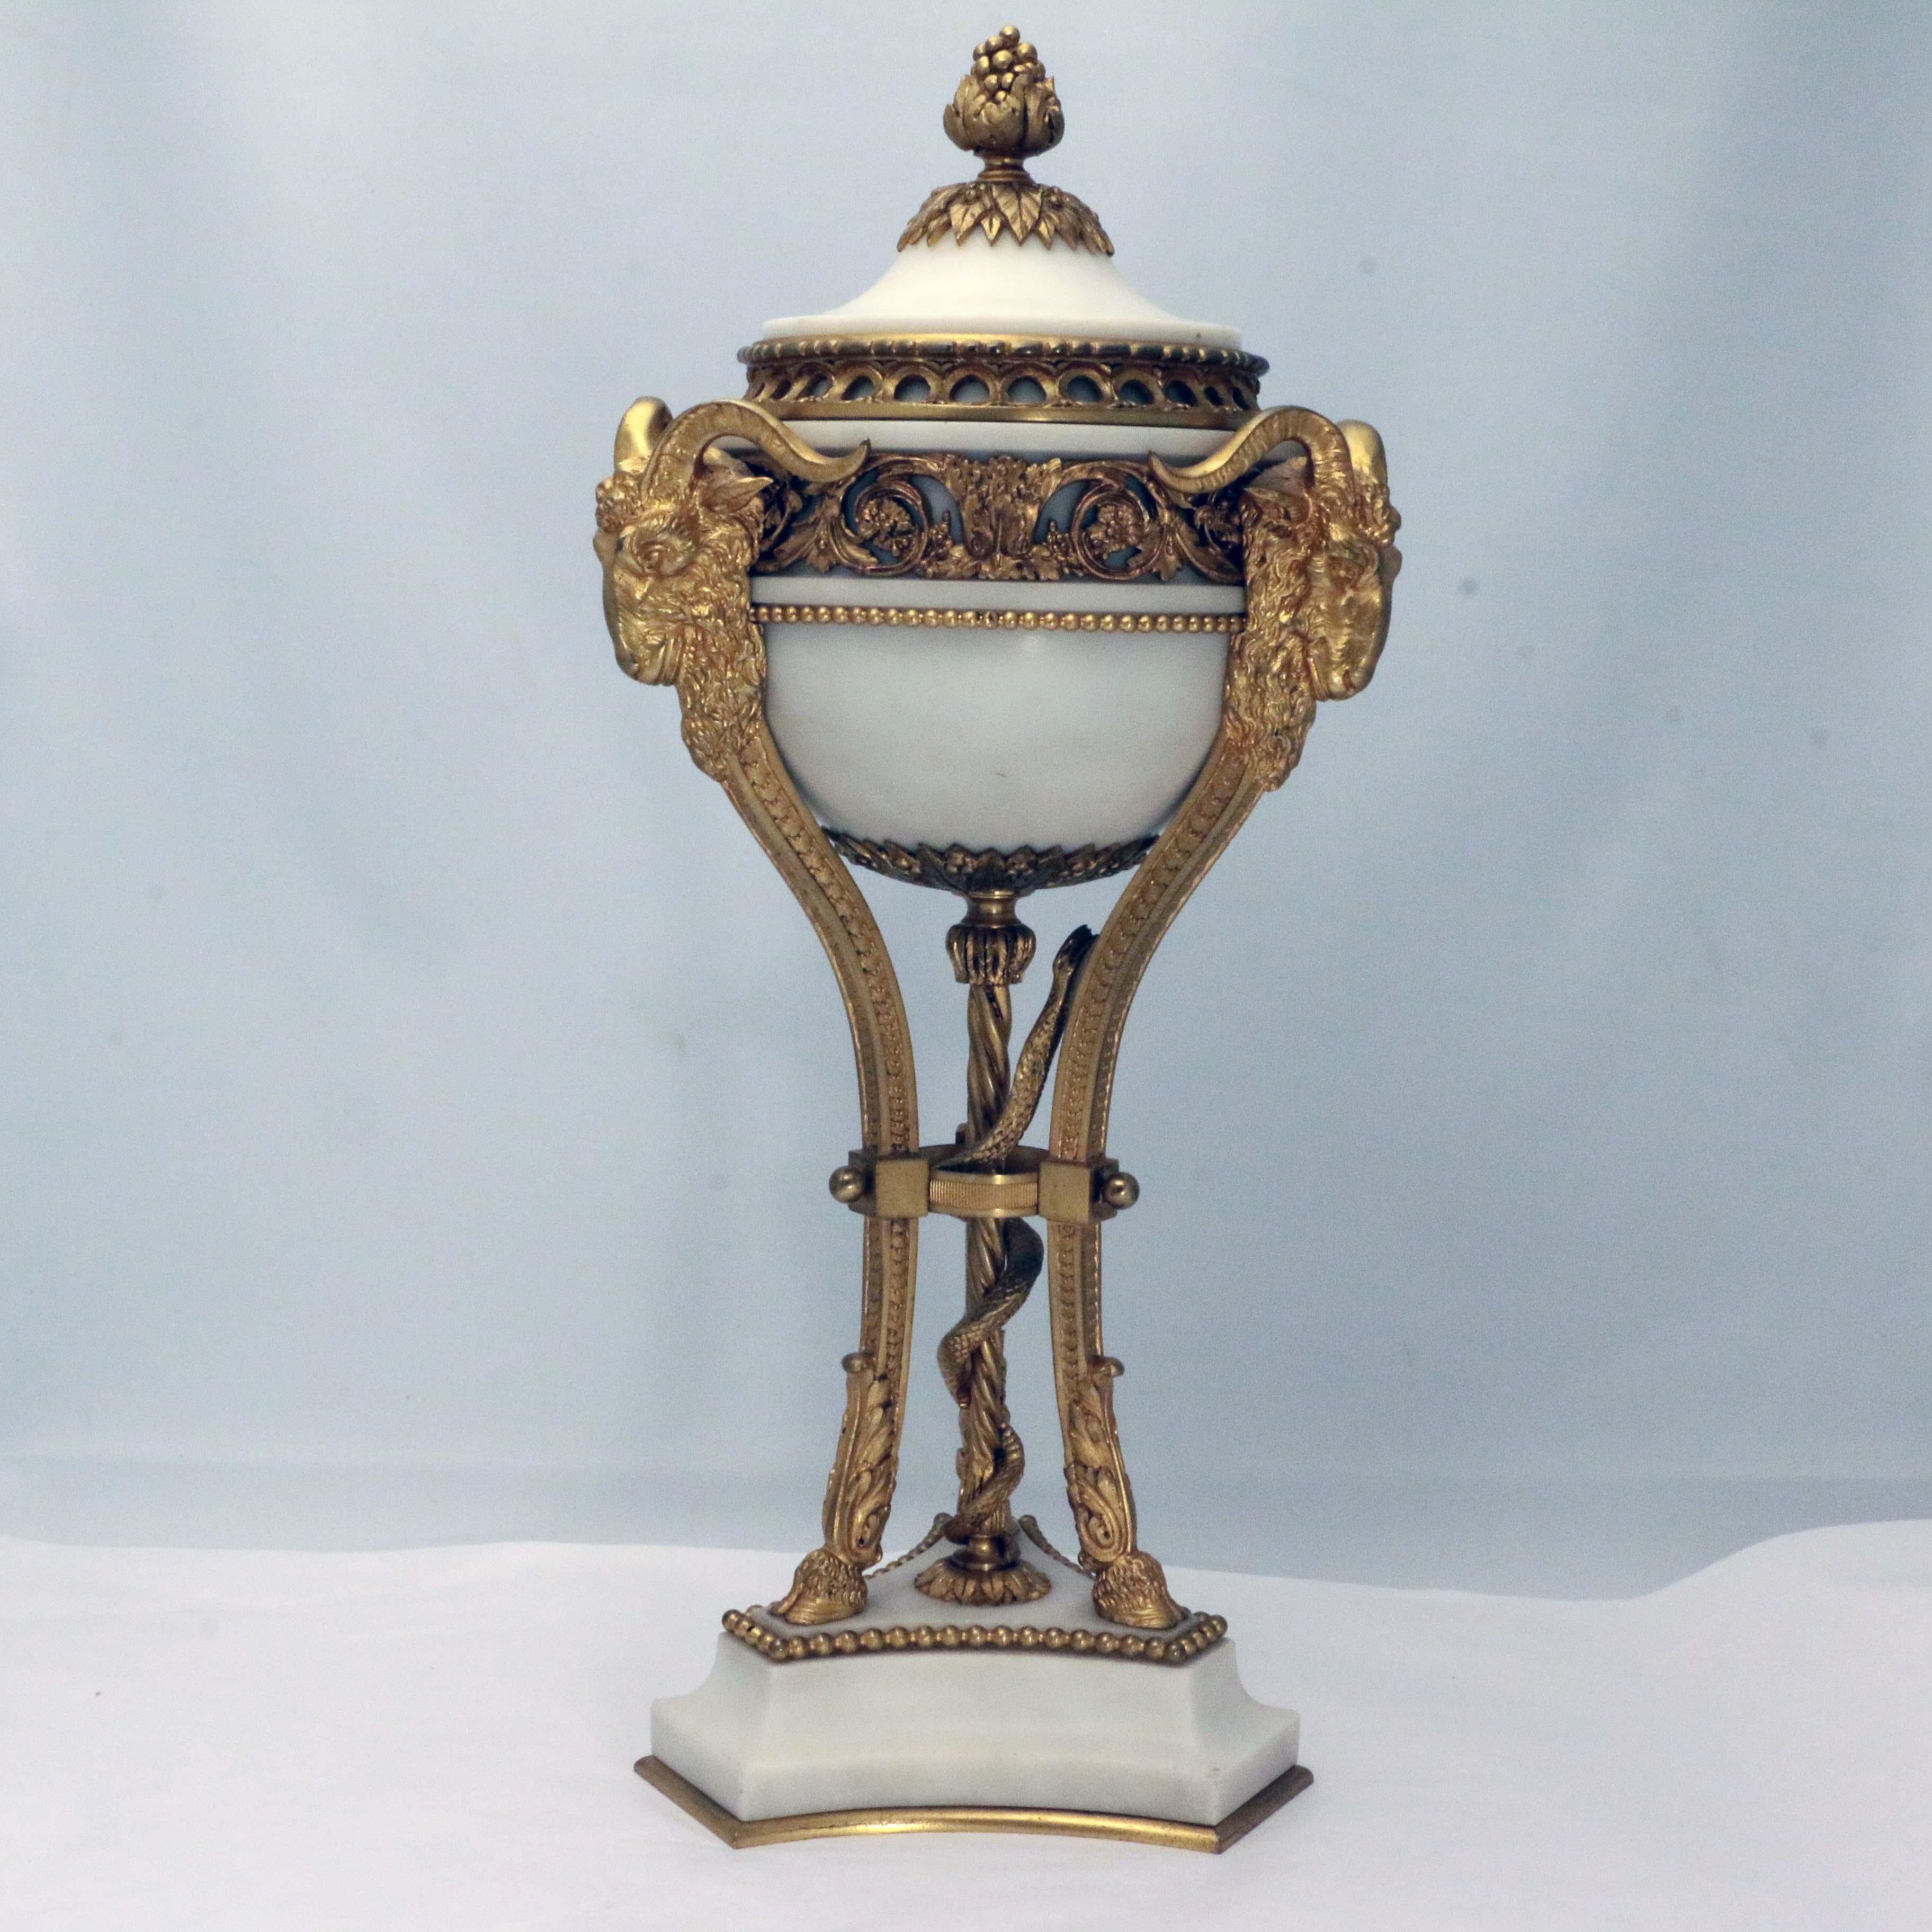 Pair of antique French Louis XVI marble and gilt bronze covered urns, each  embellished with foliate garlands and berried finial, applied with rams' masks raised on animal leg supports surrounding spiral column and serpent,  the tripartite incurving